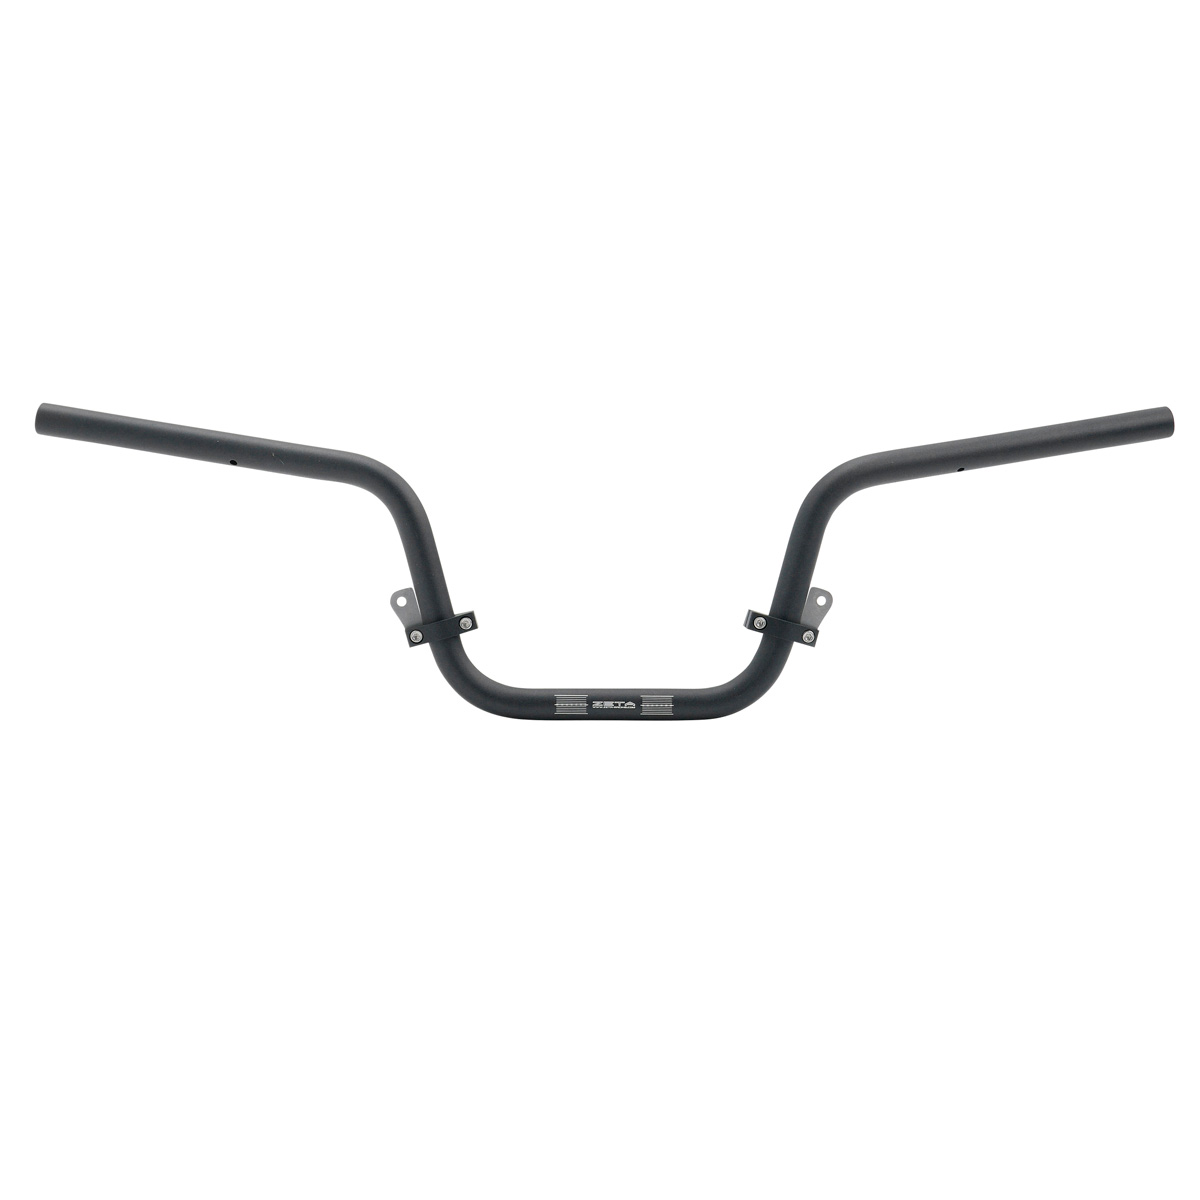 SPECIALIZED HANDLEBAR CT125